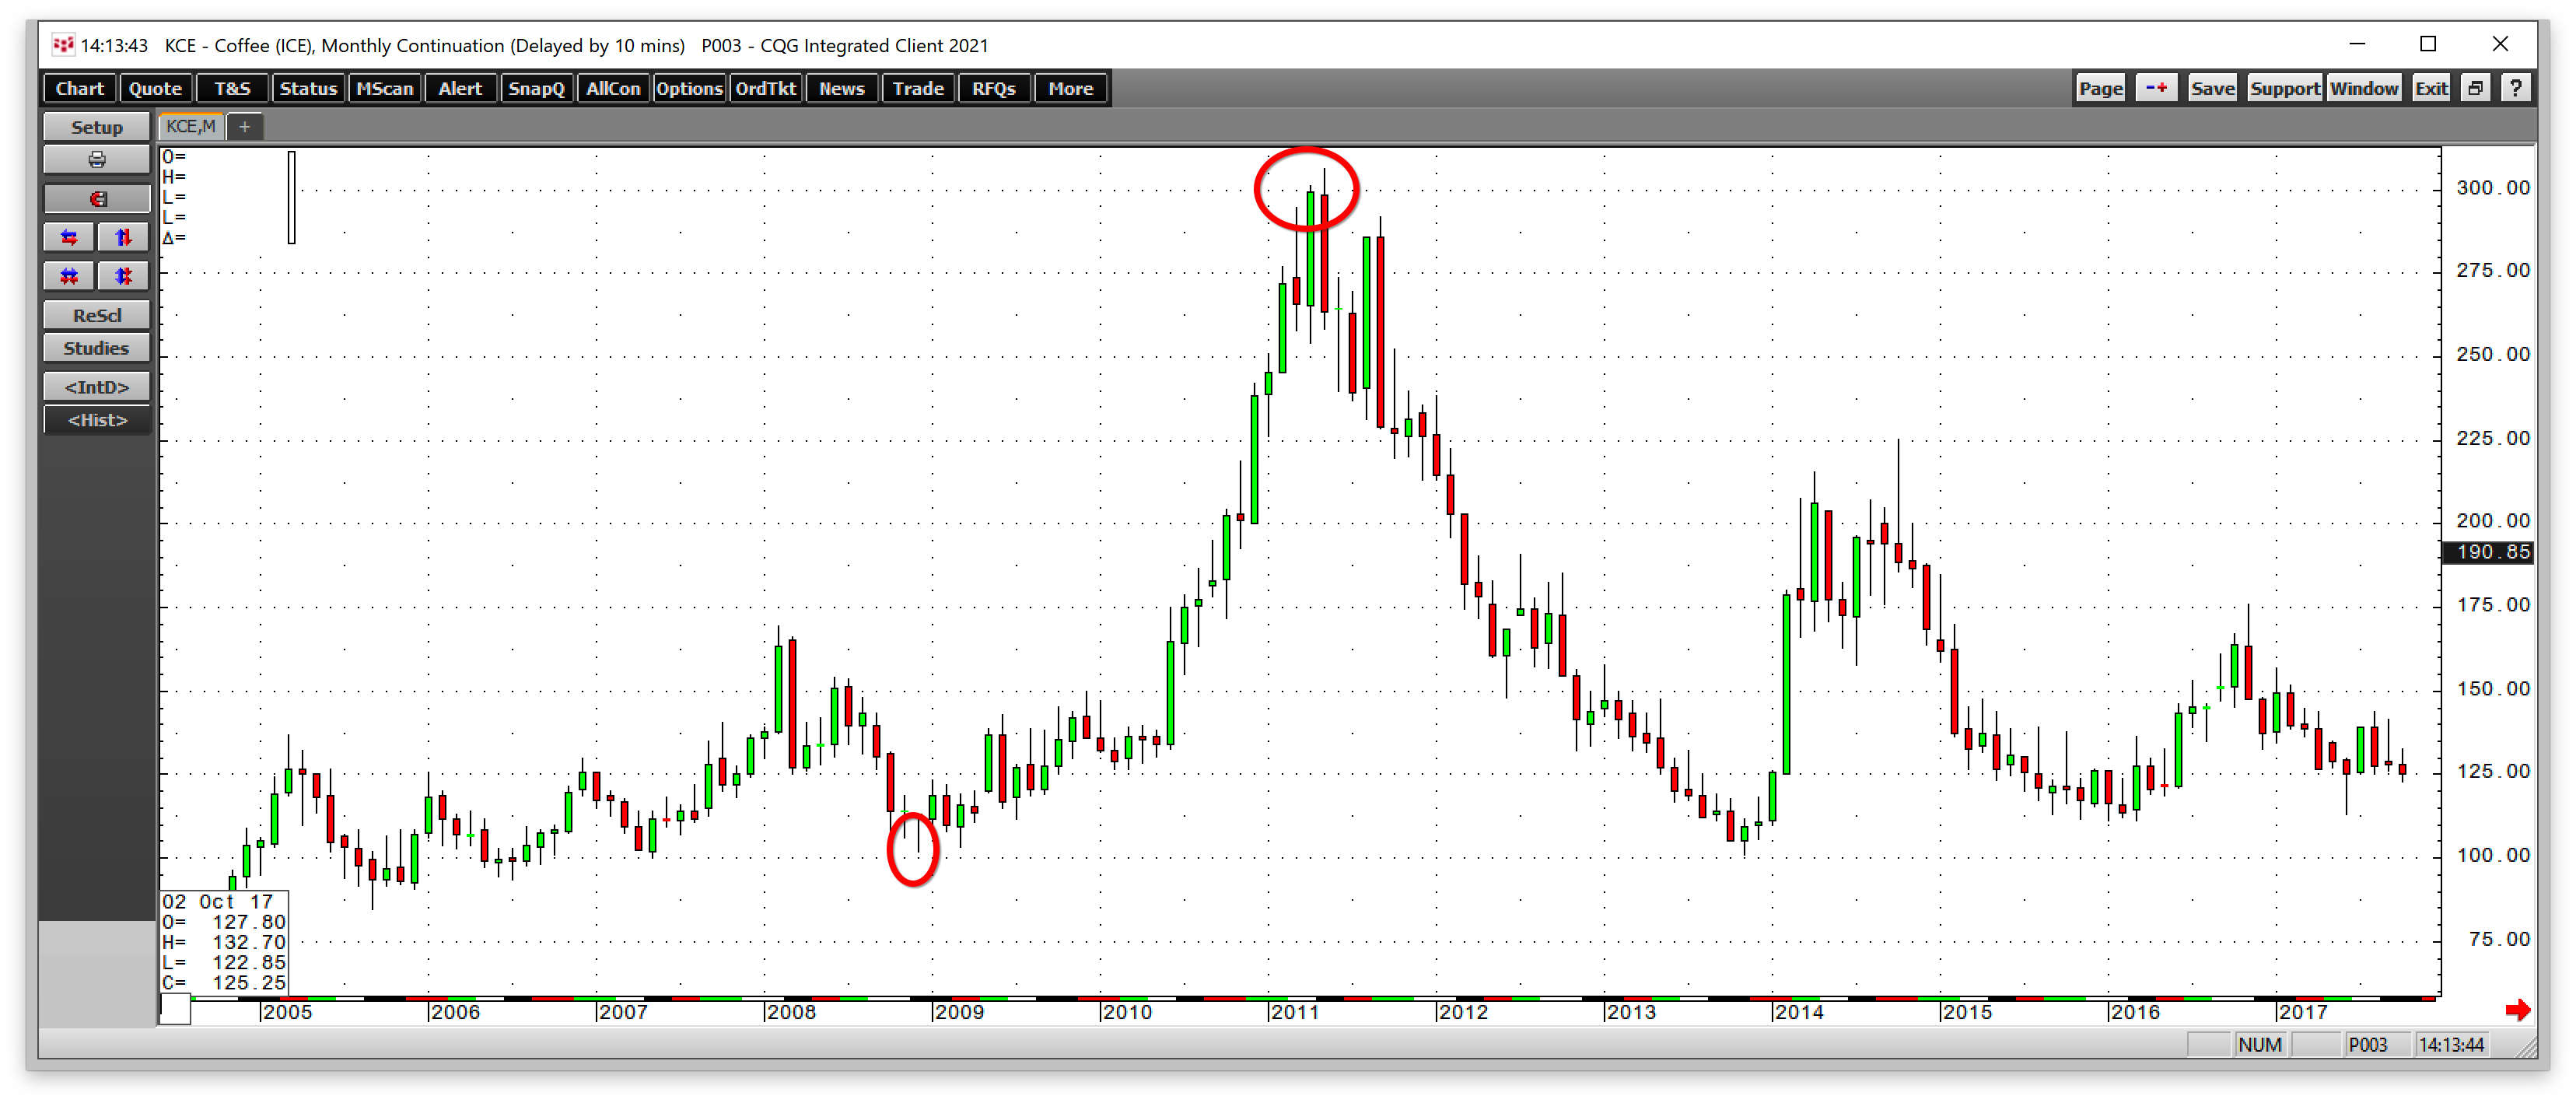 Coffee Futures Monthly